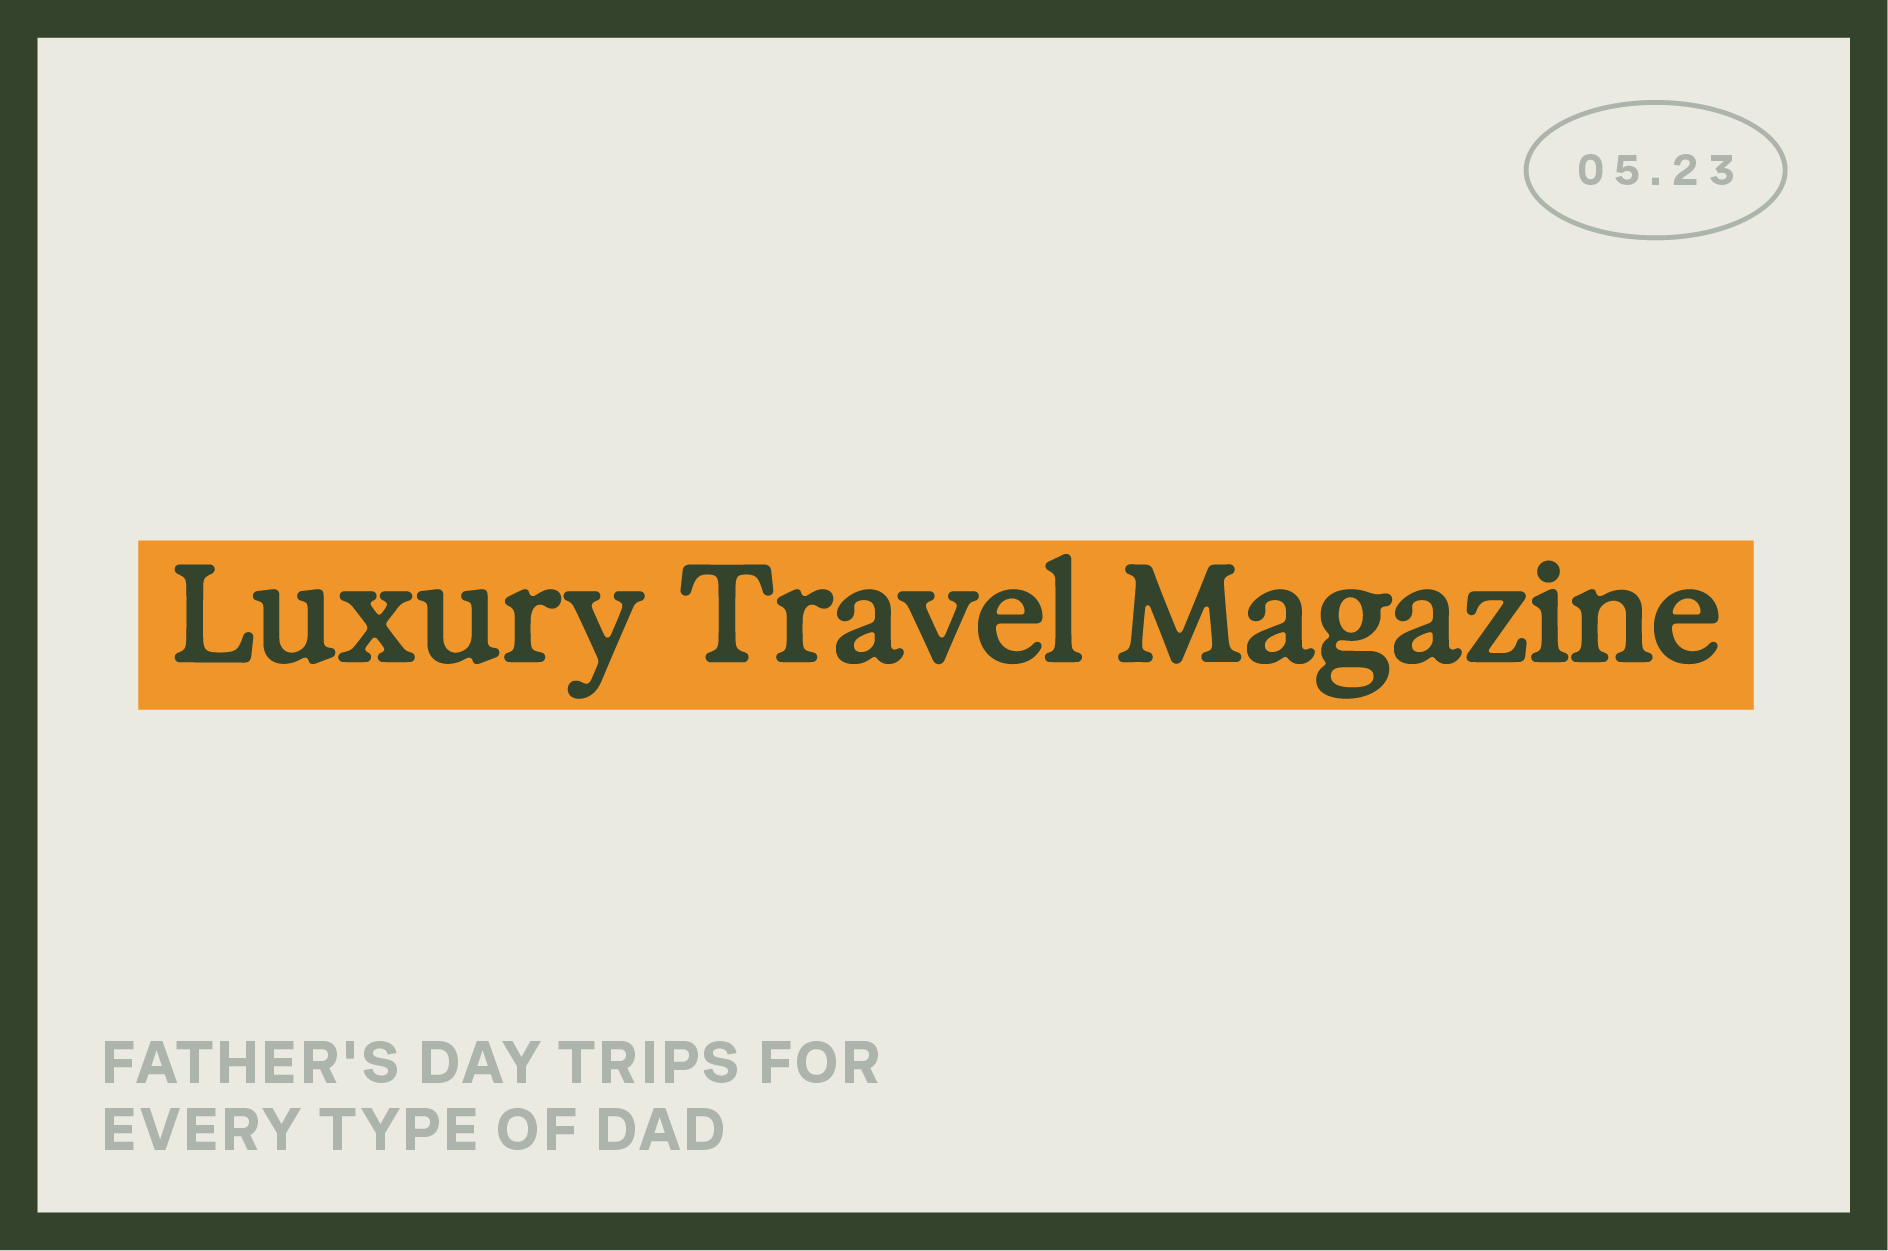 "Luxury Travel Magazine" banner presents "Father's Day trips for every type of dad."